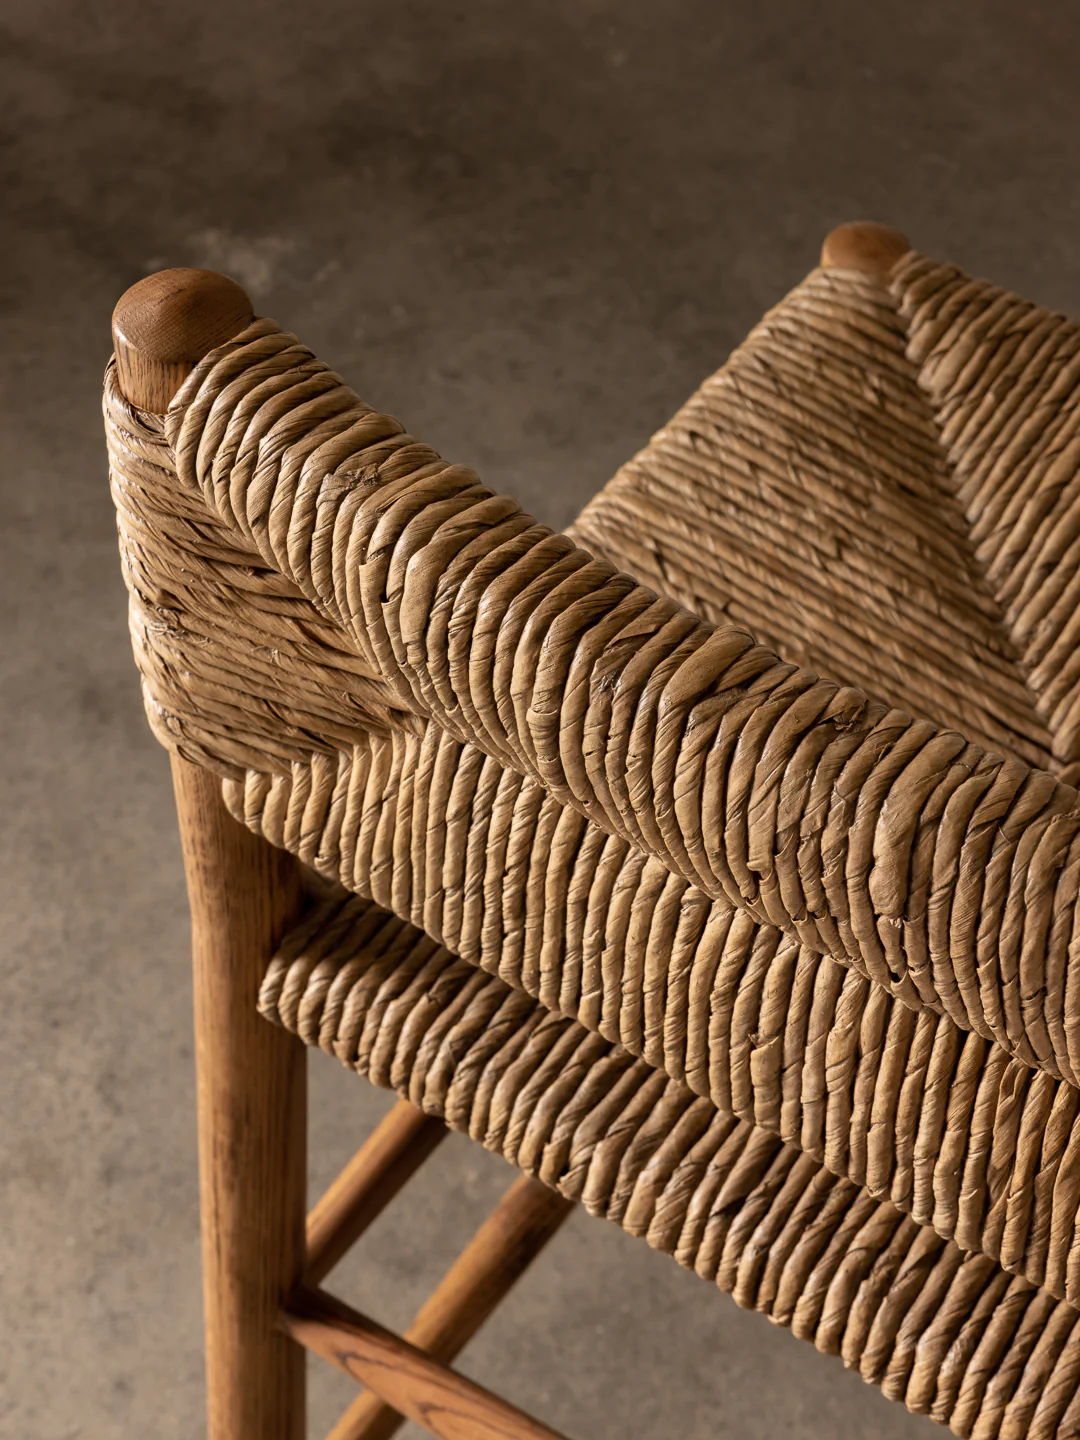 a close up of a wooden chair with a woven seat